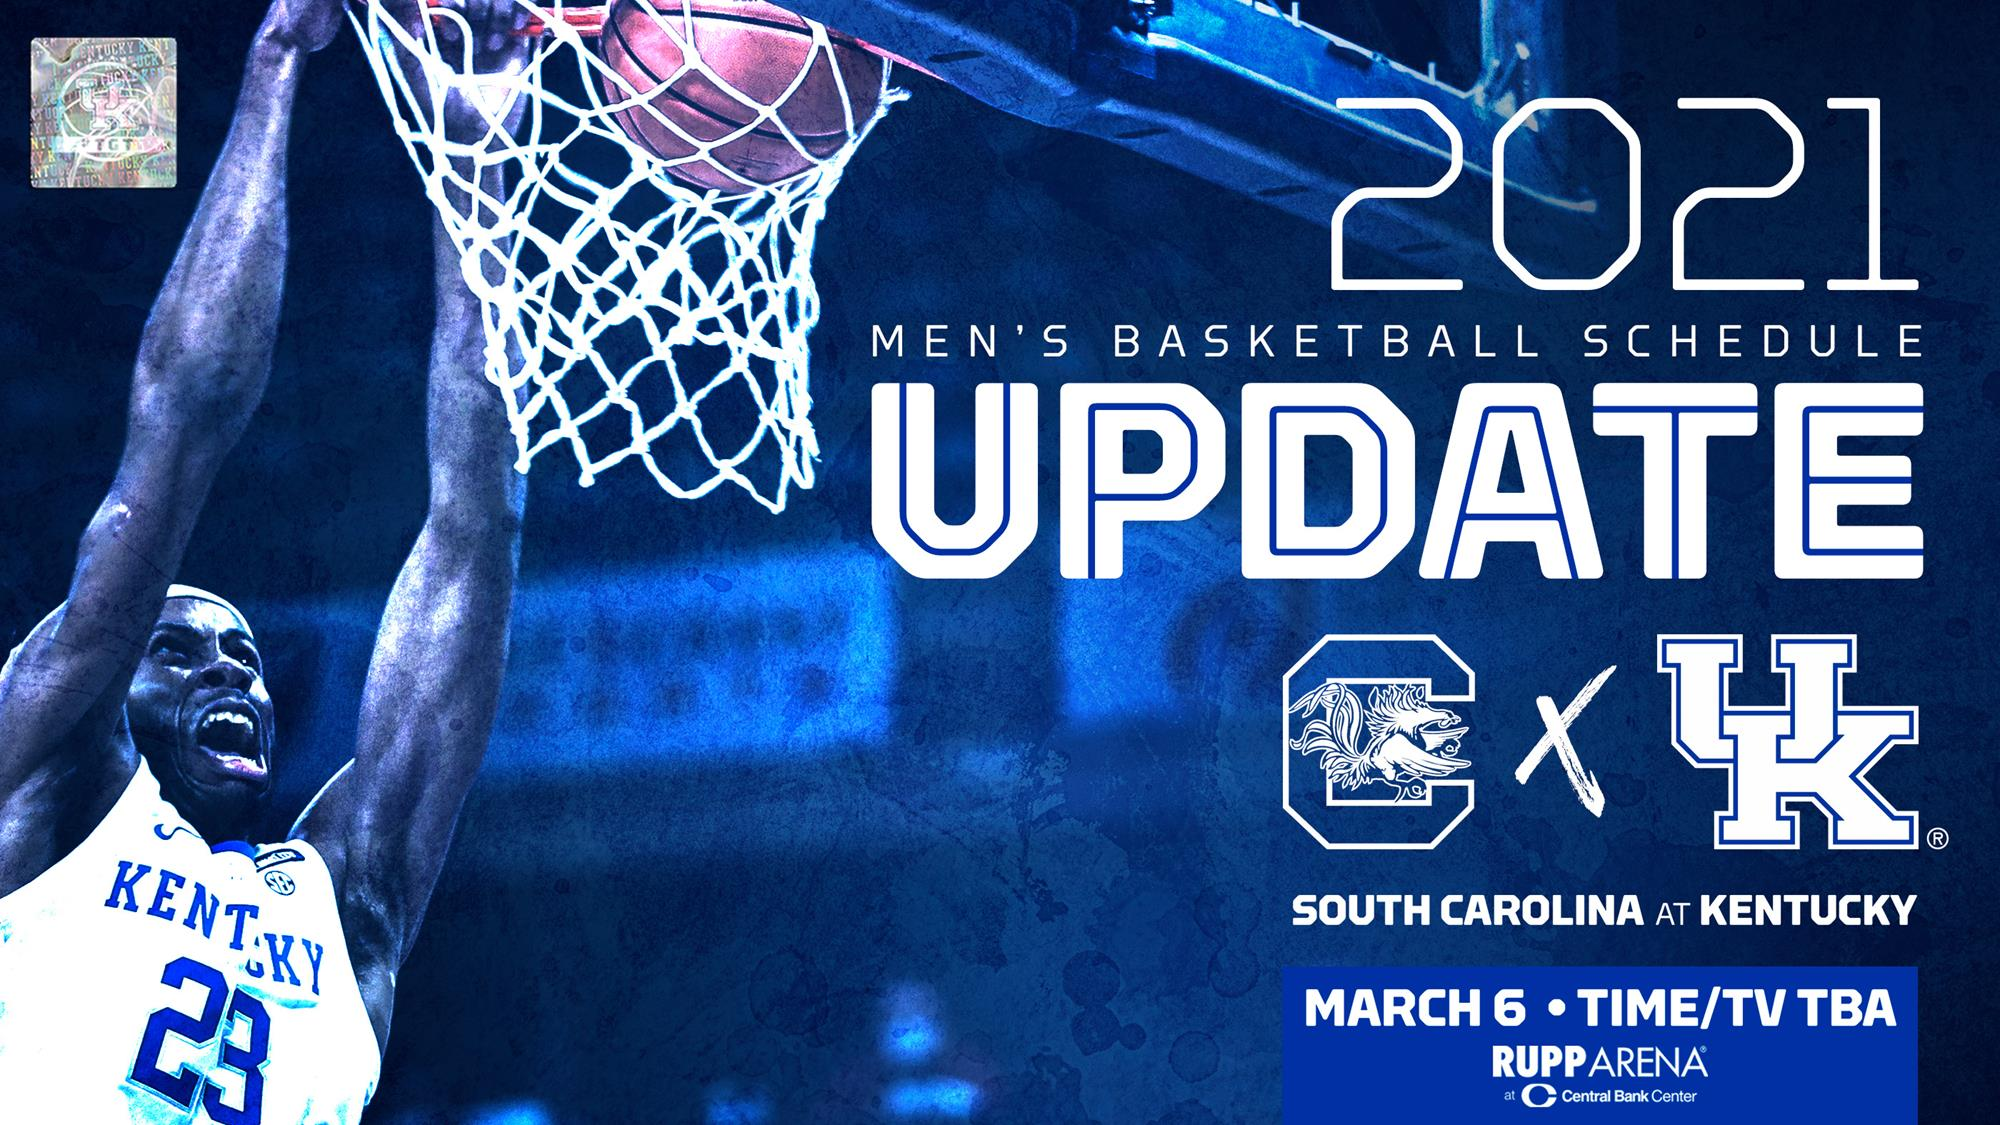 UK MBB Game vs. South Carolina Rescheduled for March 6